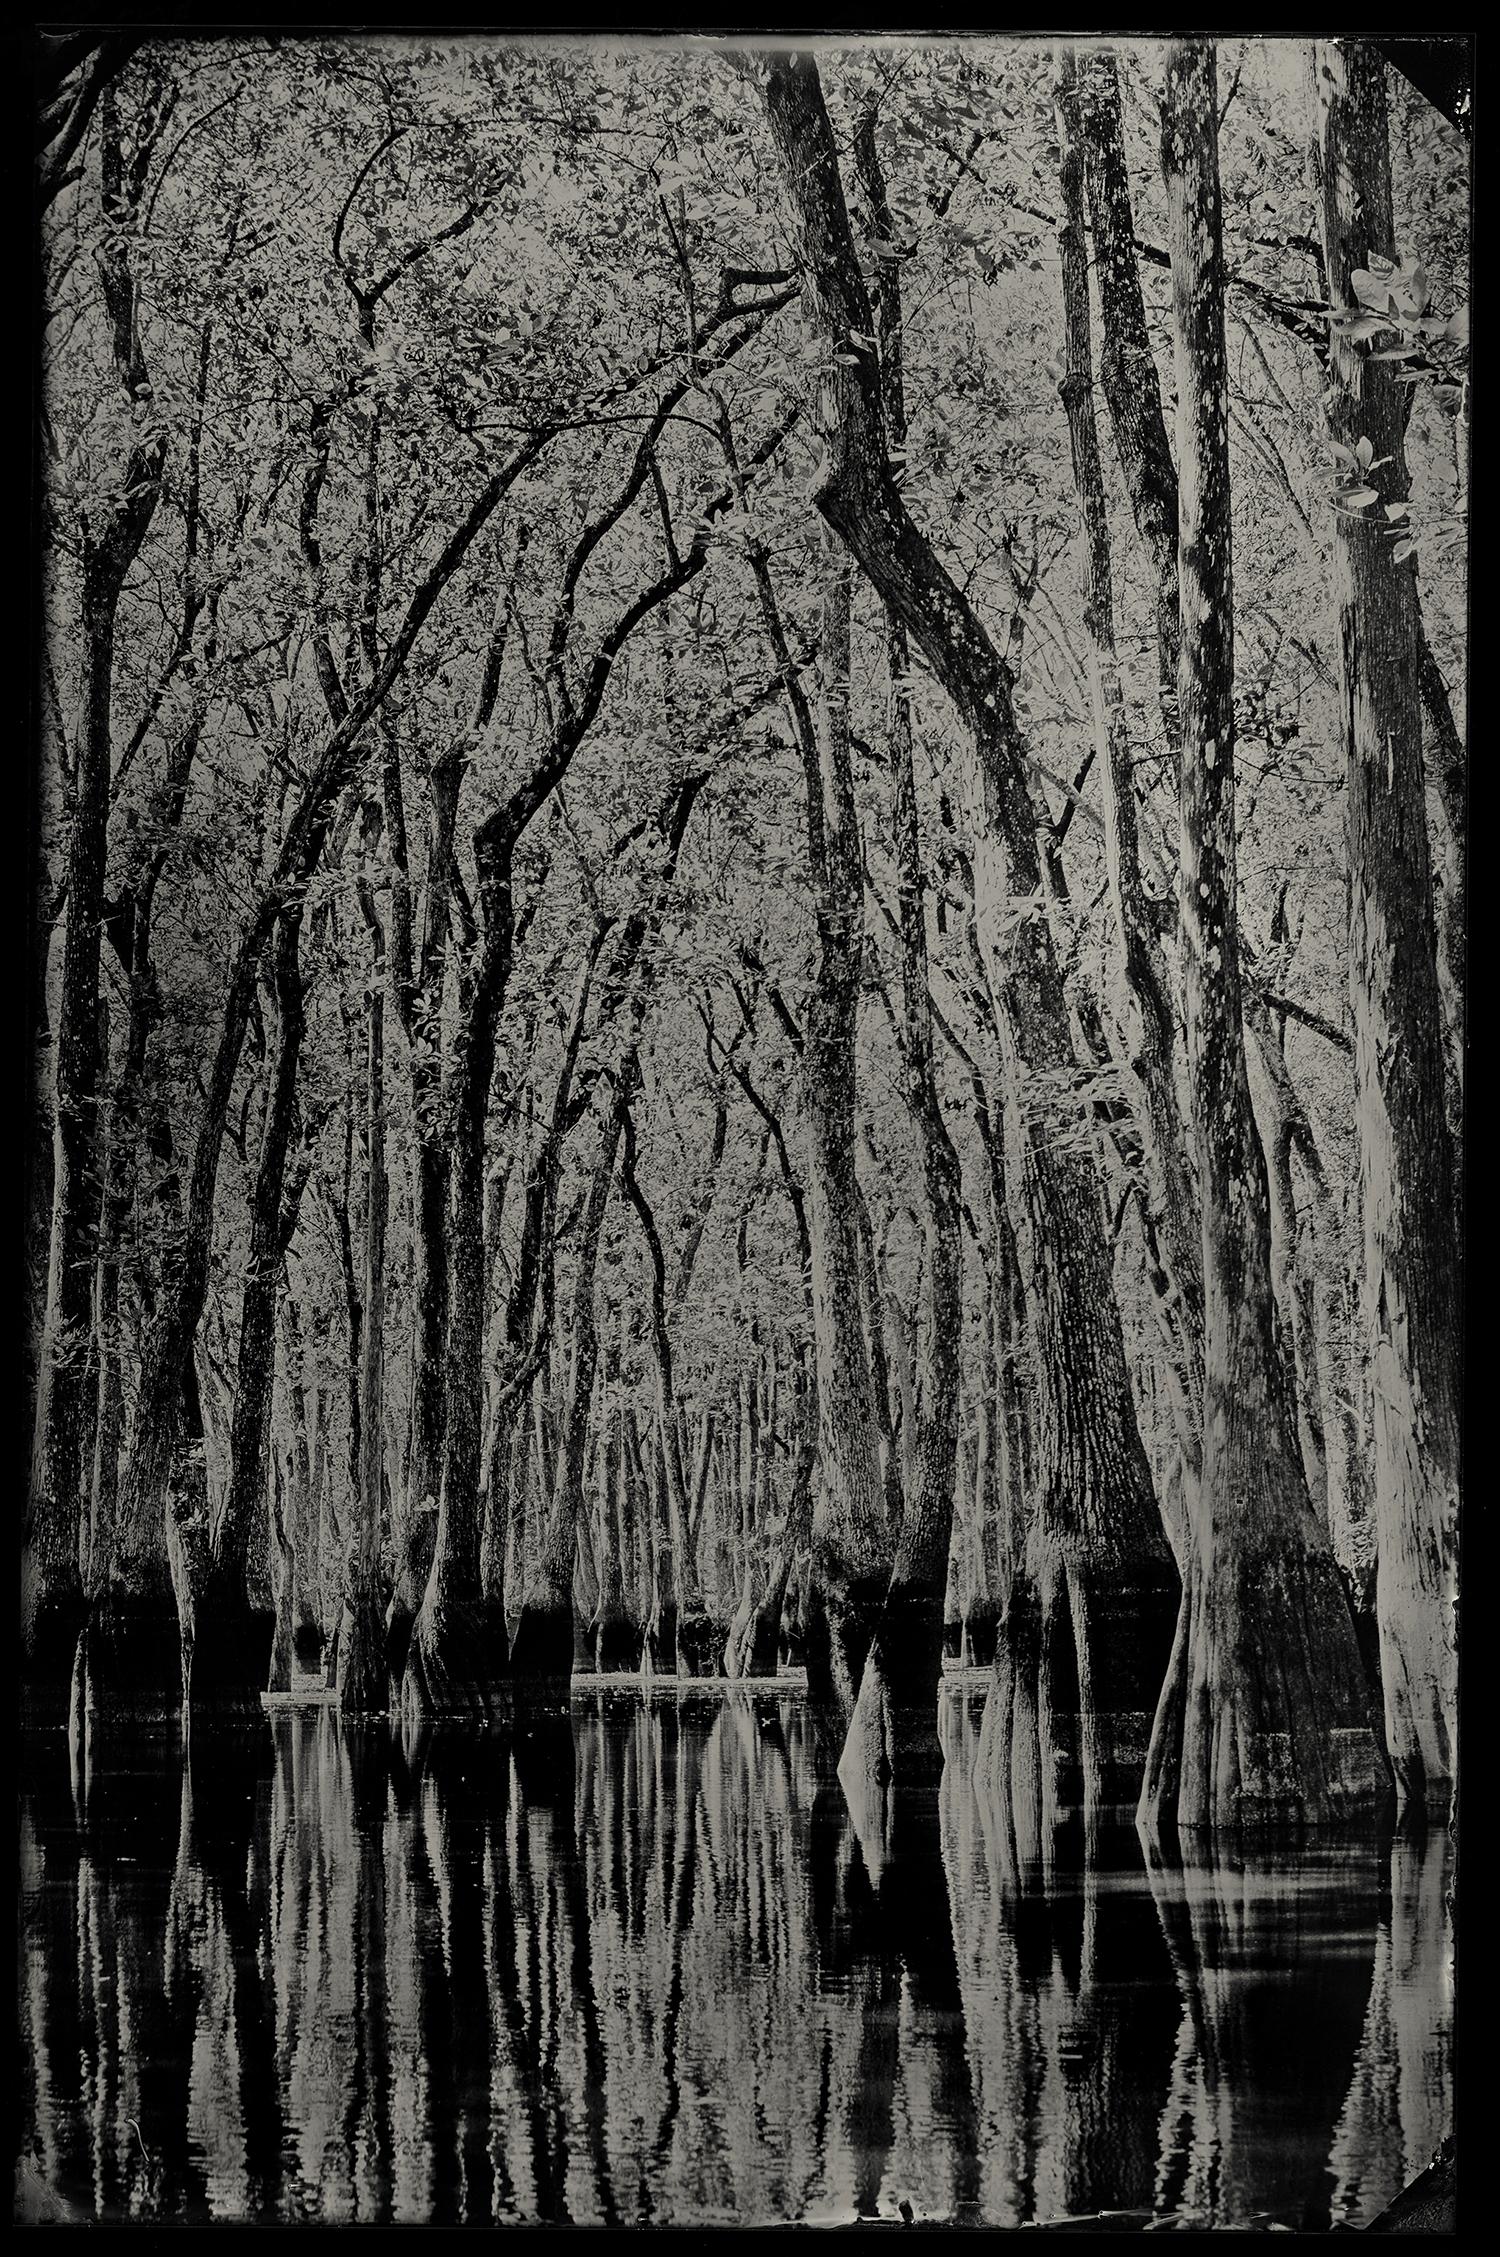 Creation's Cathedral - wet plate collodion - retablo - landscape photography - Photograph by Cecilia Montalvo & Charlie McCullers